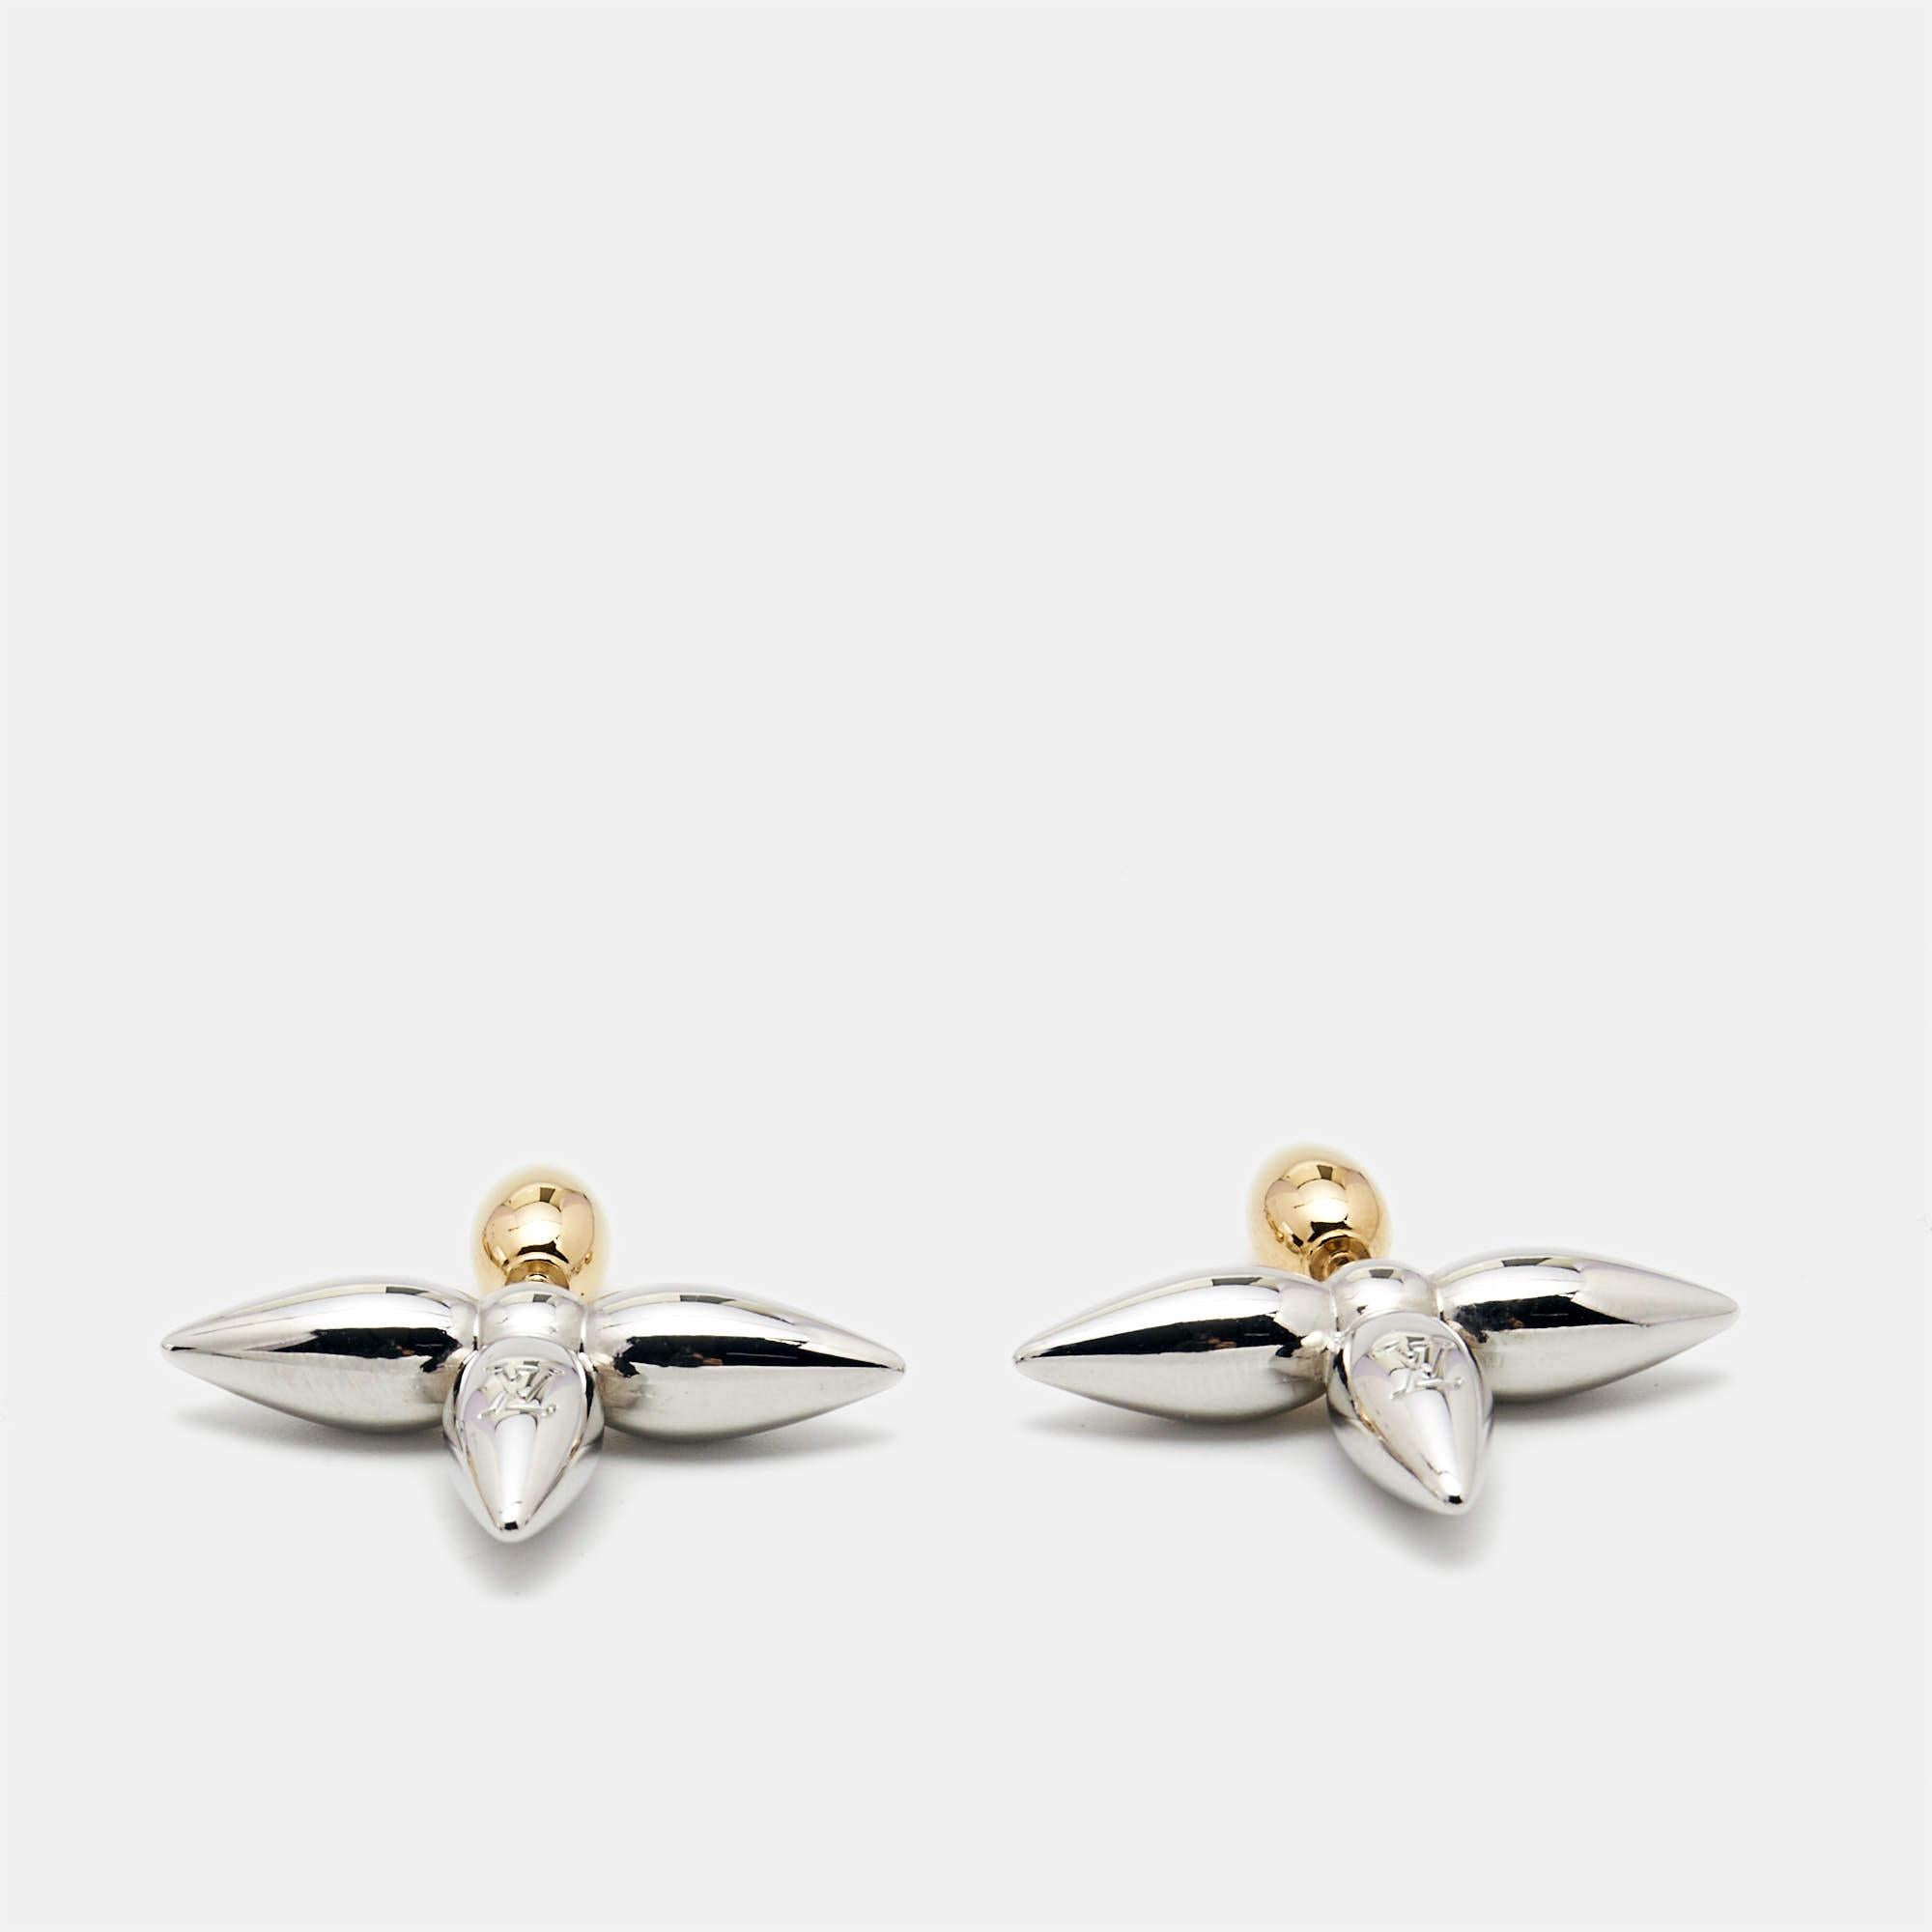 These stunning earrings are elegant and fabulous. Crafted from two-tone gold metal, they are the perfect accessory to add that contemporary touch to your look.

Includes: Original Dustbag, Original Box

